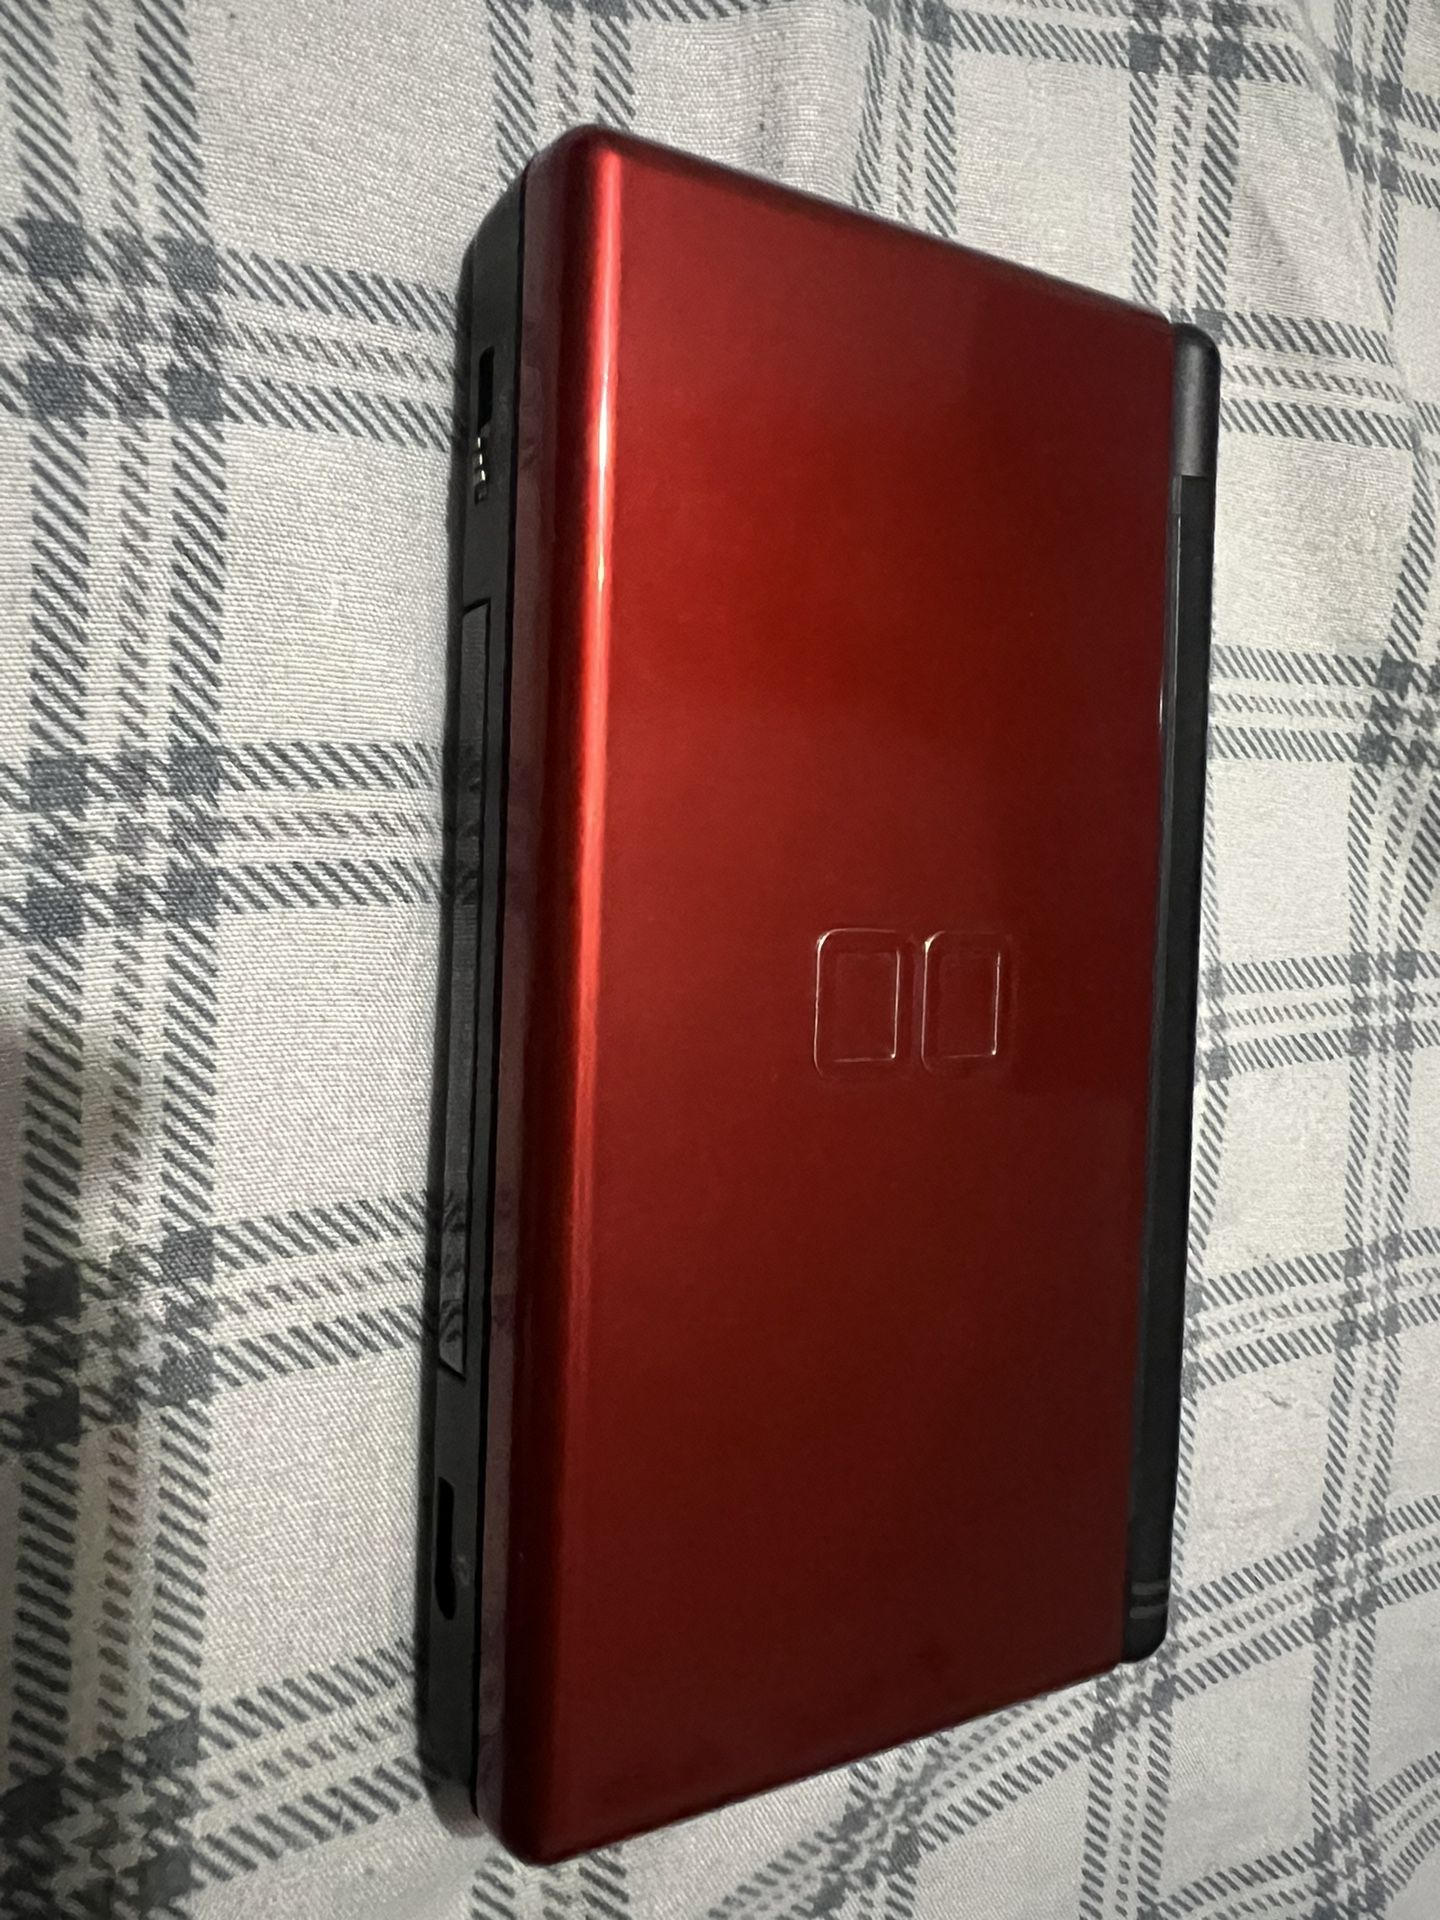 Red Ds Lite With Free Game